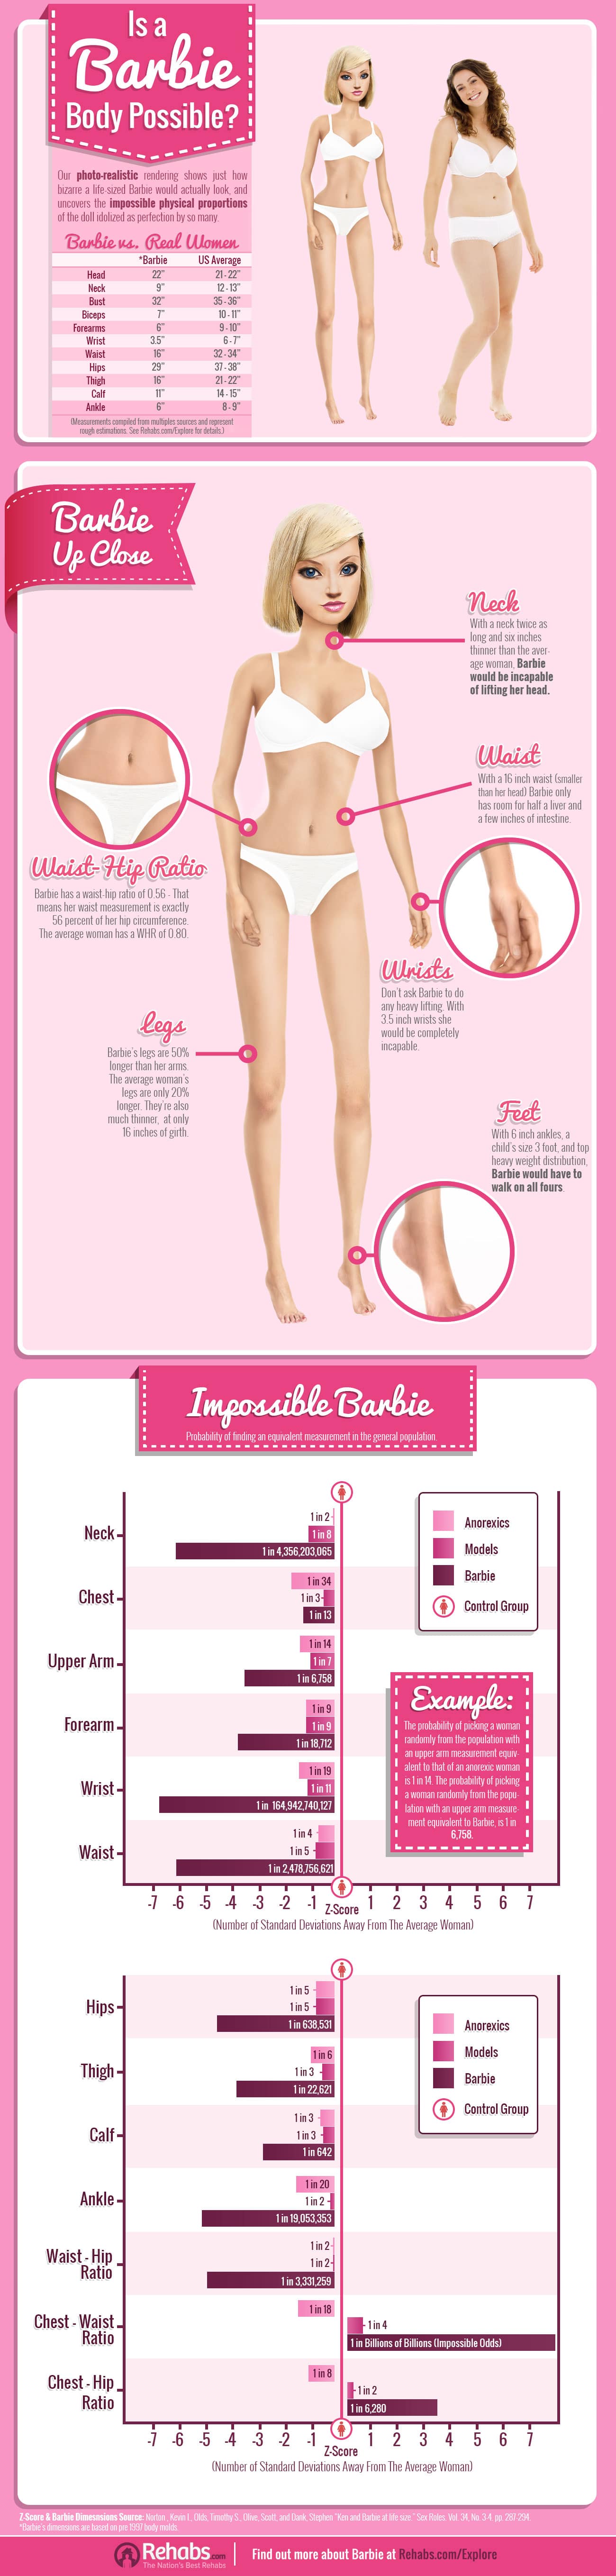 A Typical Barbie Body vs. A Typical Real Woman Body [Infographic]